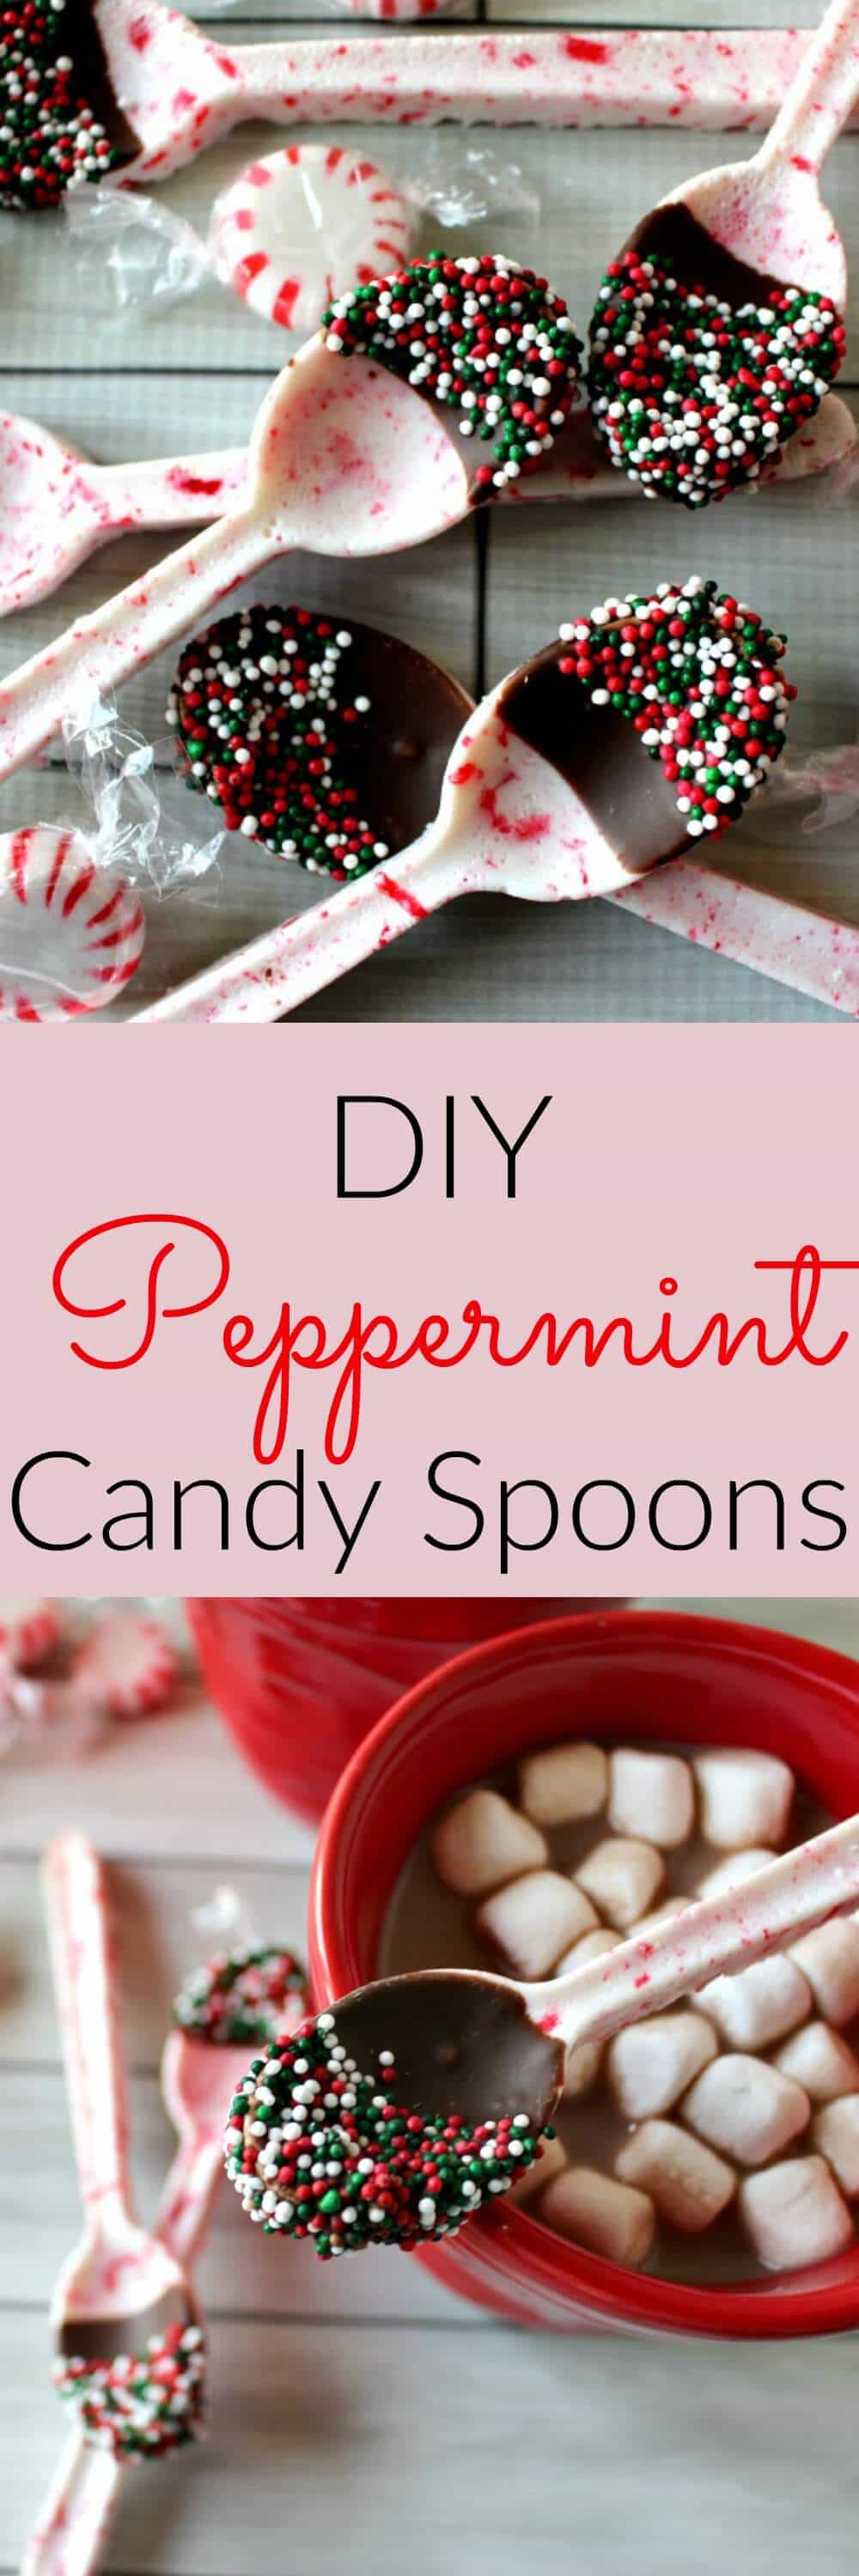 Christmas DIY Gifts
 DIY Peppermint Candy Spoons Princess Pinky Girl